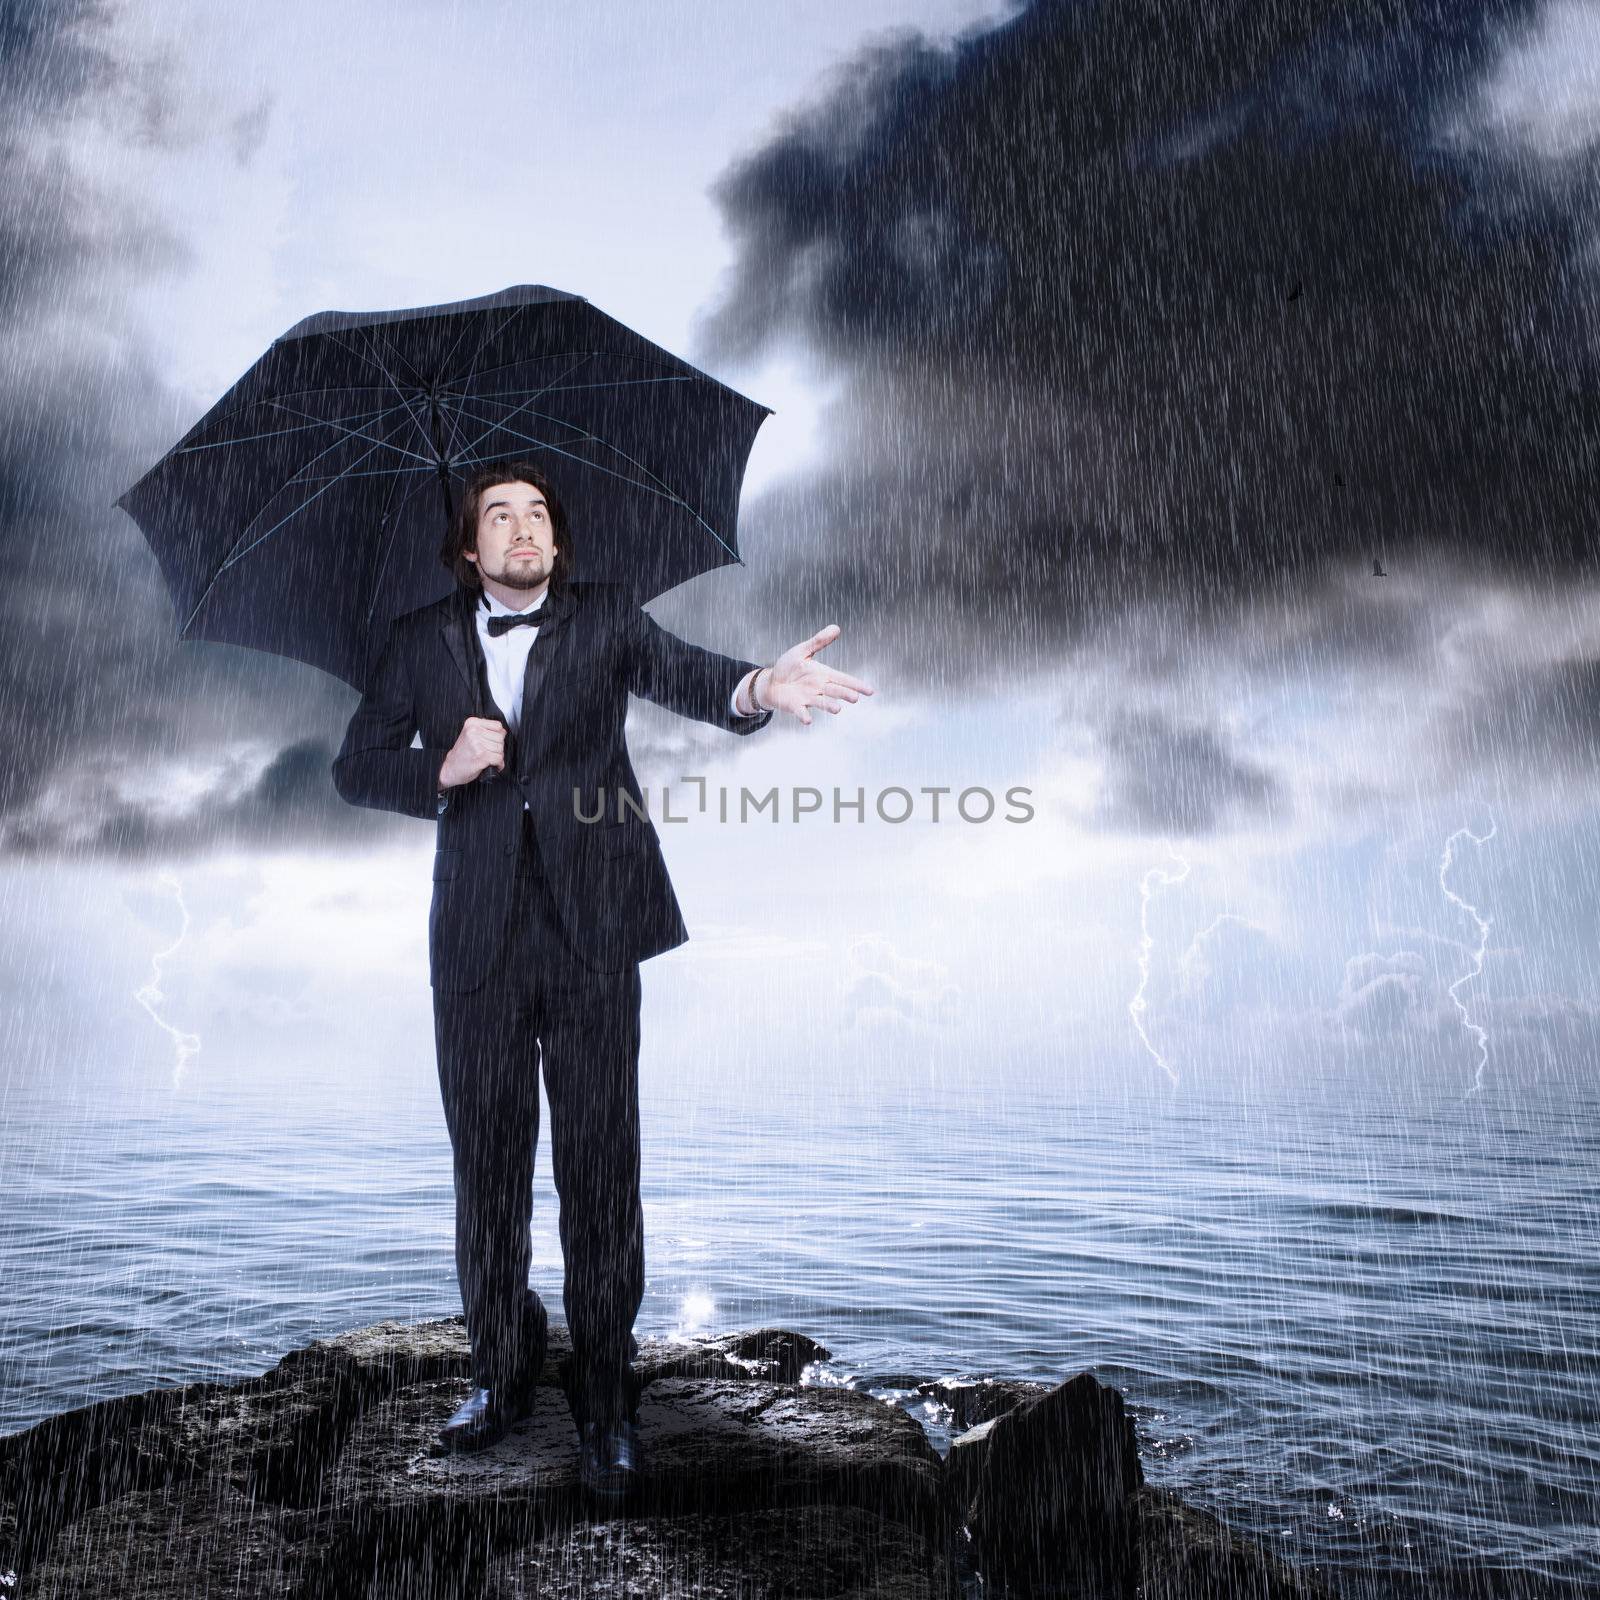 Man Under Umbrella Checking for Rain Coming or Clearing by melpomene